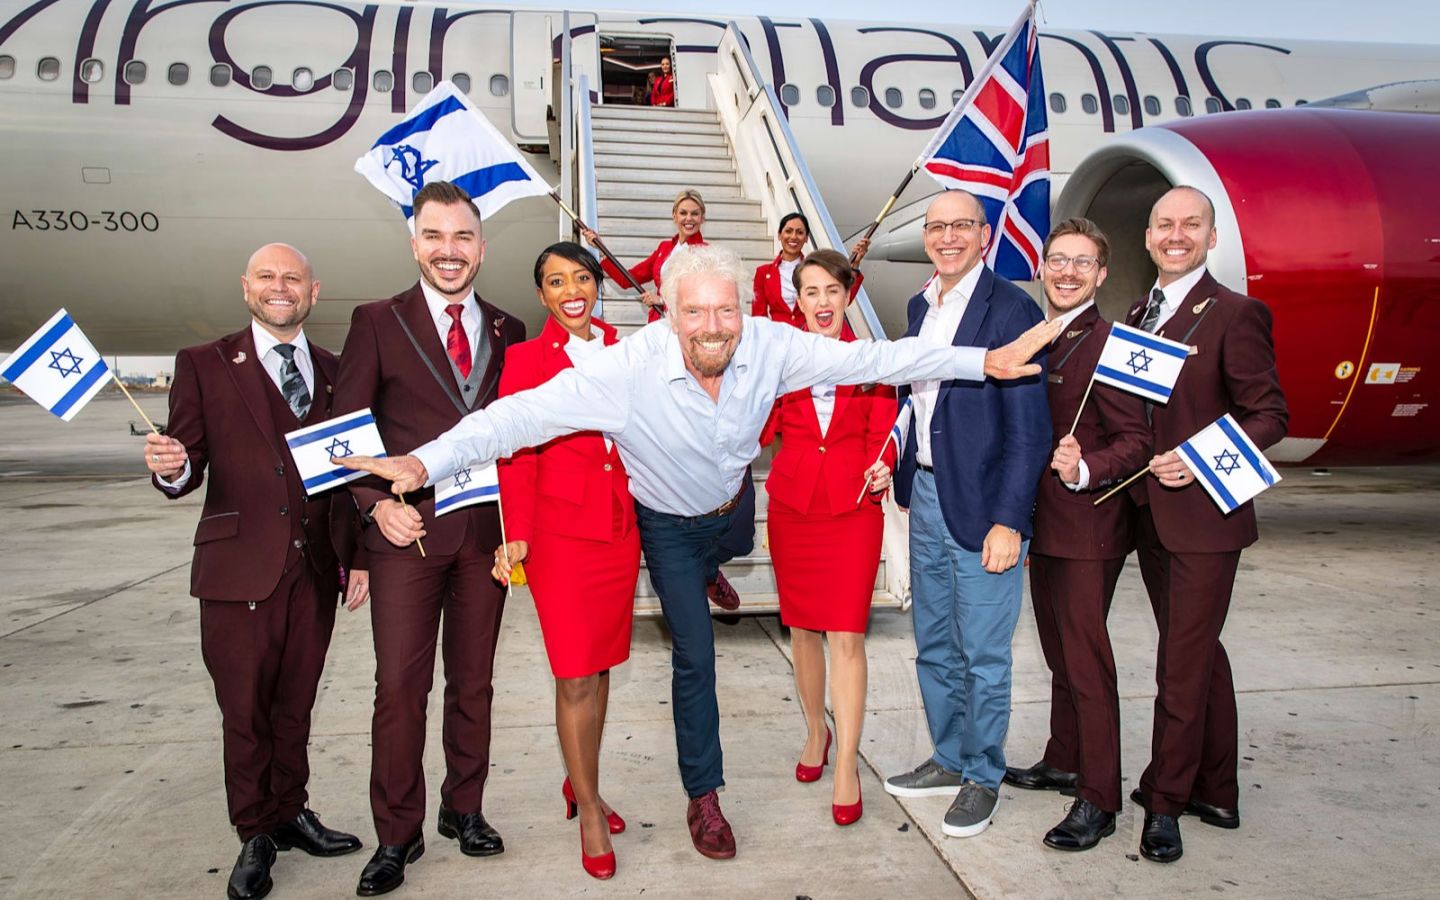 Richard Branson and cabin crew stand in front of a plane holding Union and Israeli flags